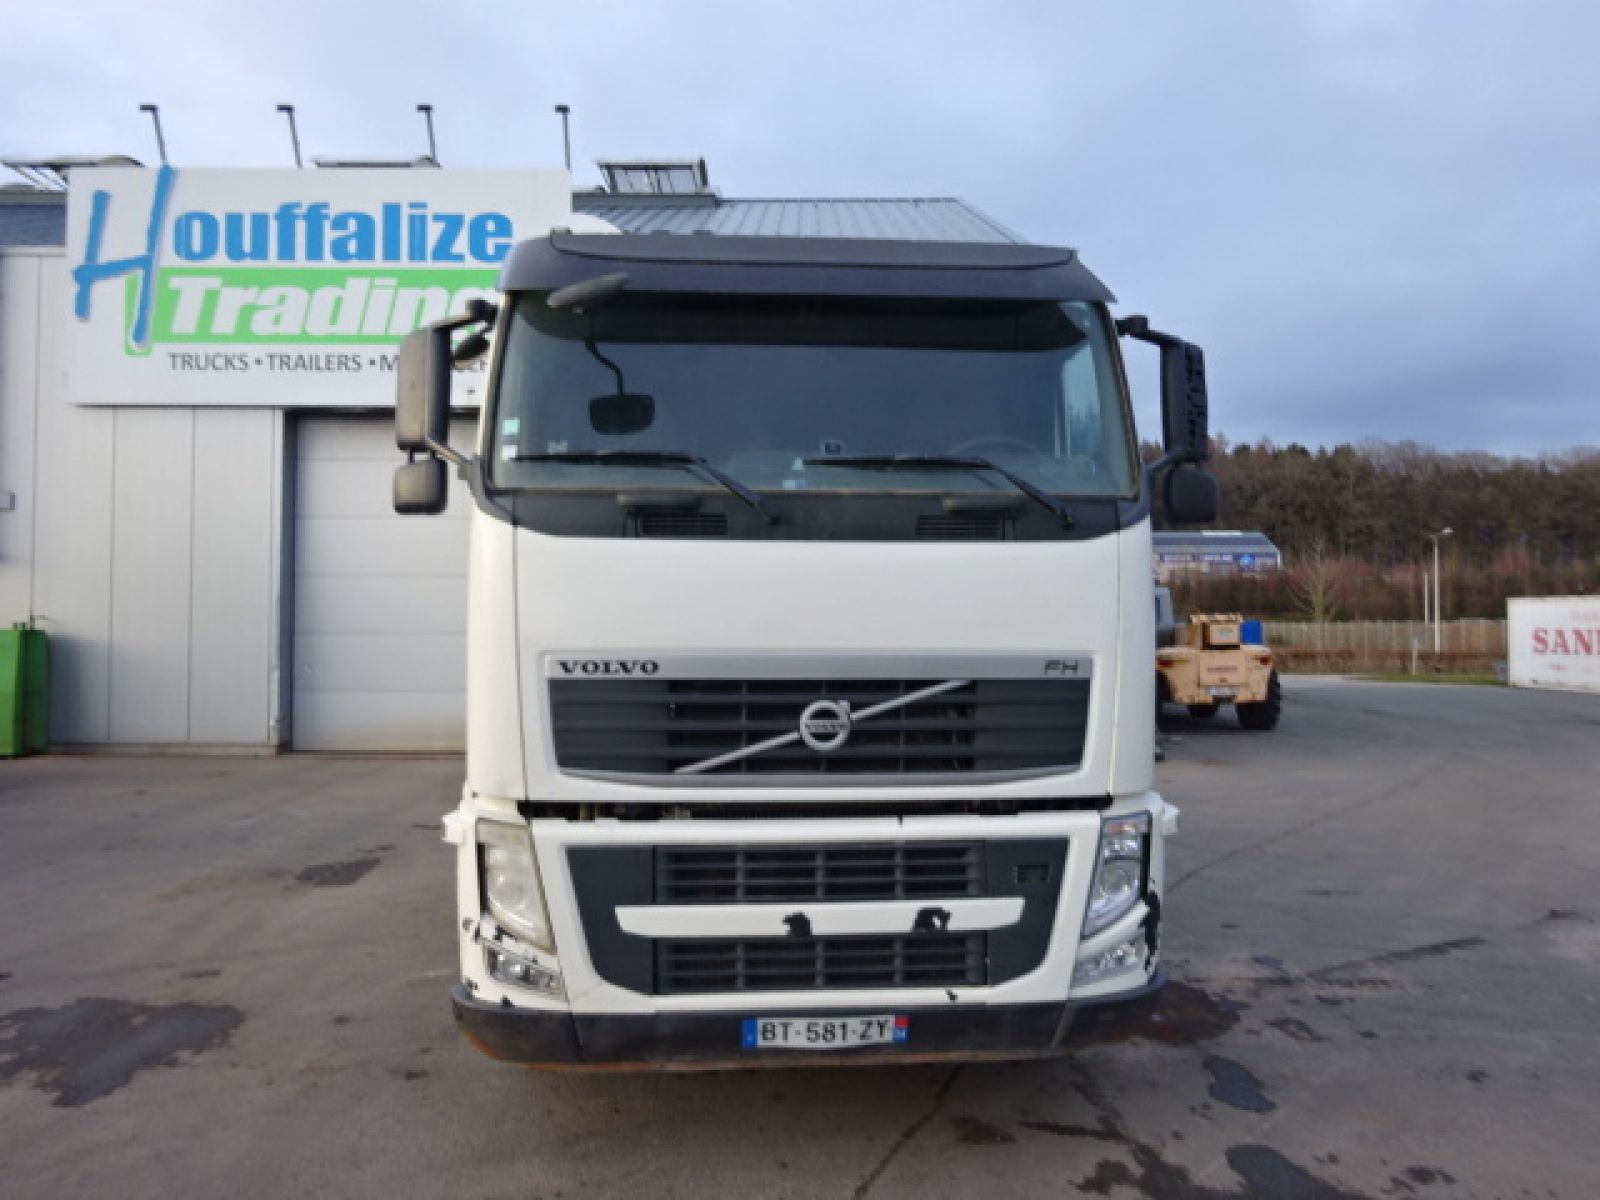 Vente occasion  Tracteur - VOLVO FH 460  Tracteur (Belgique - Europe) - Houffalize Trading s.a.